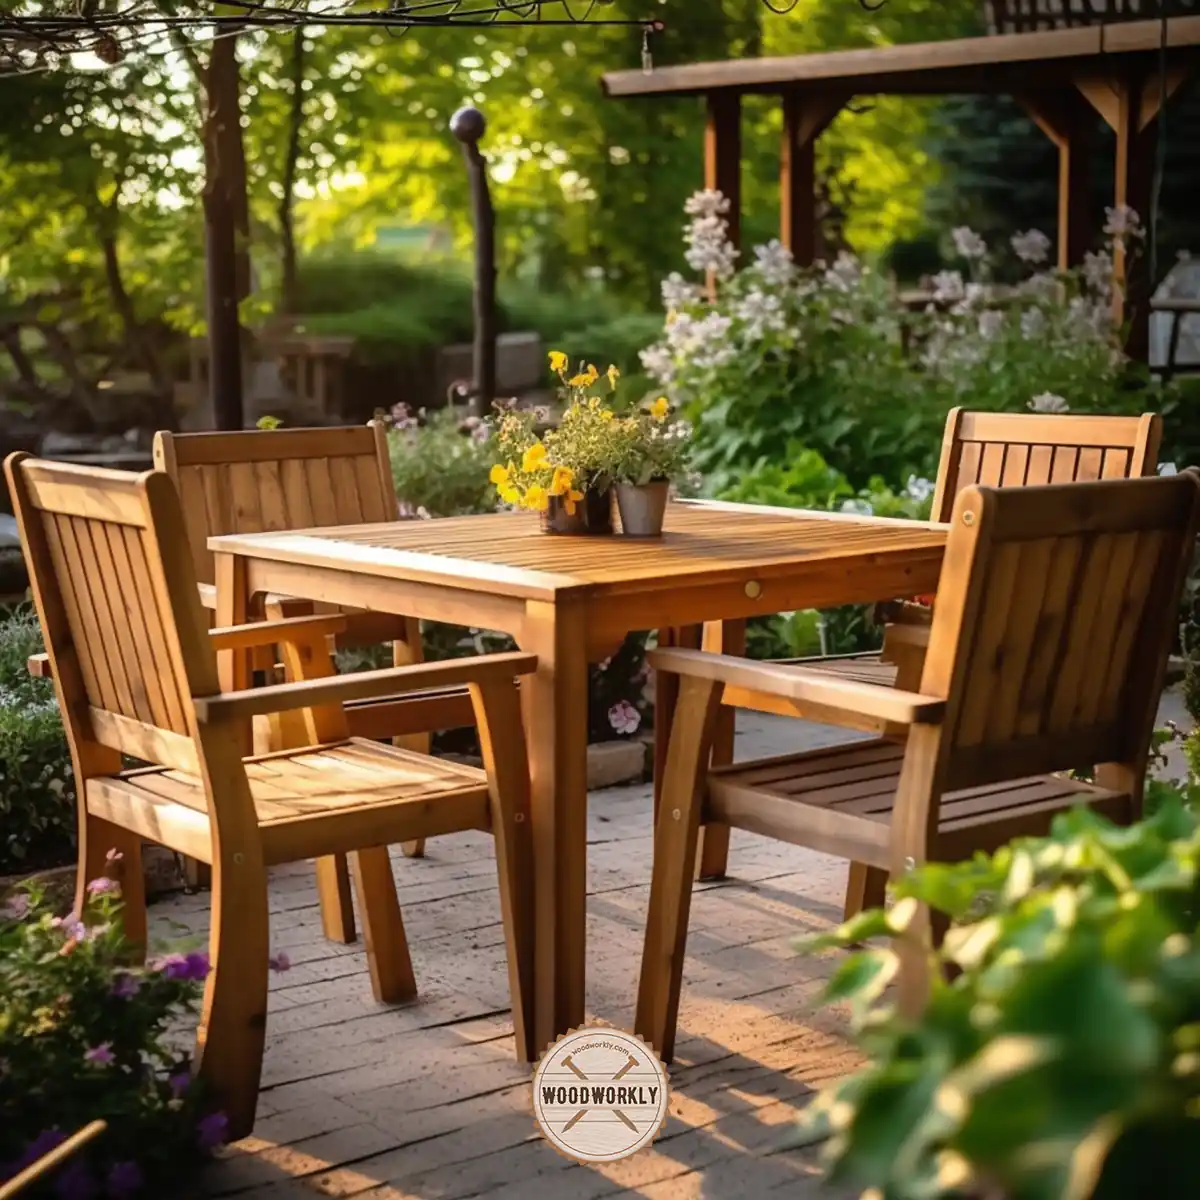 Outdoor patio furniture stained with gel stain